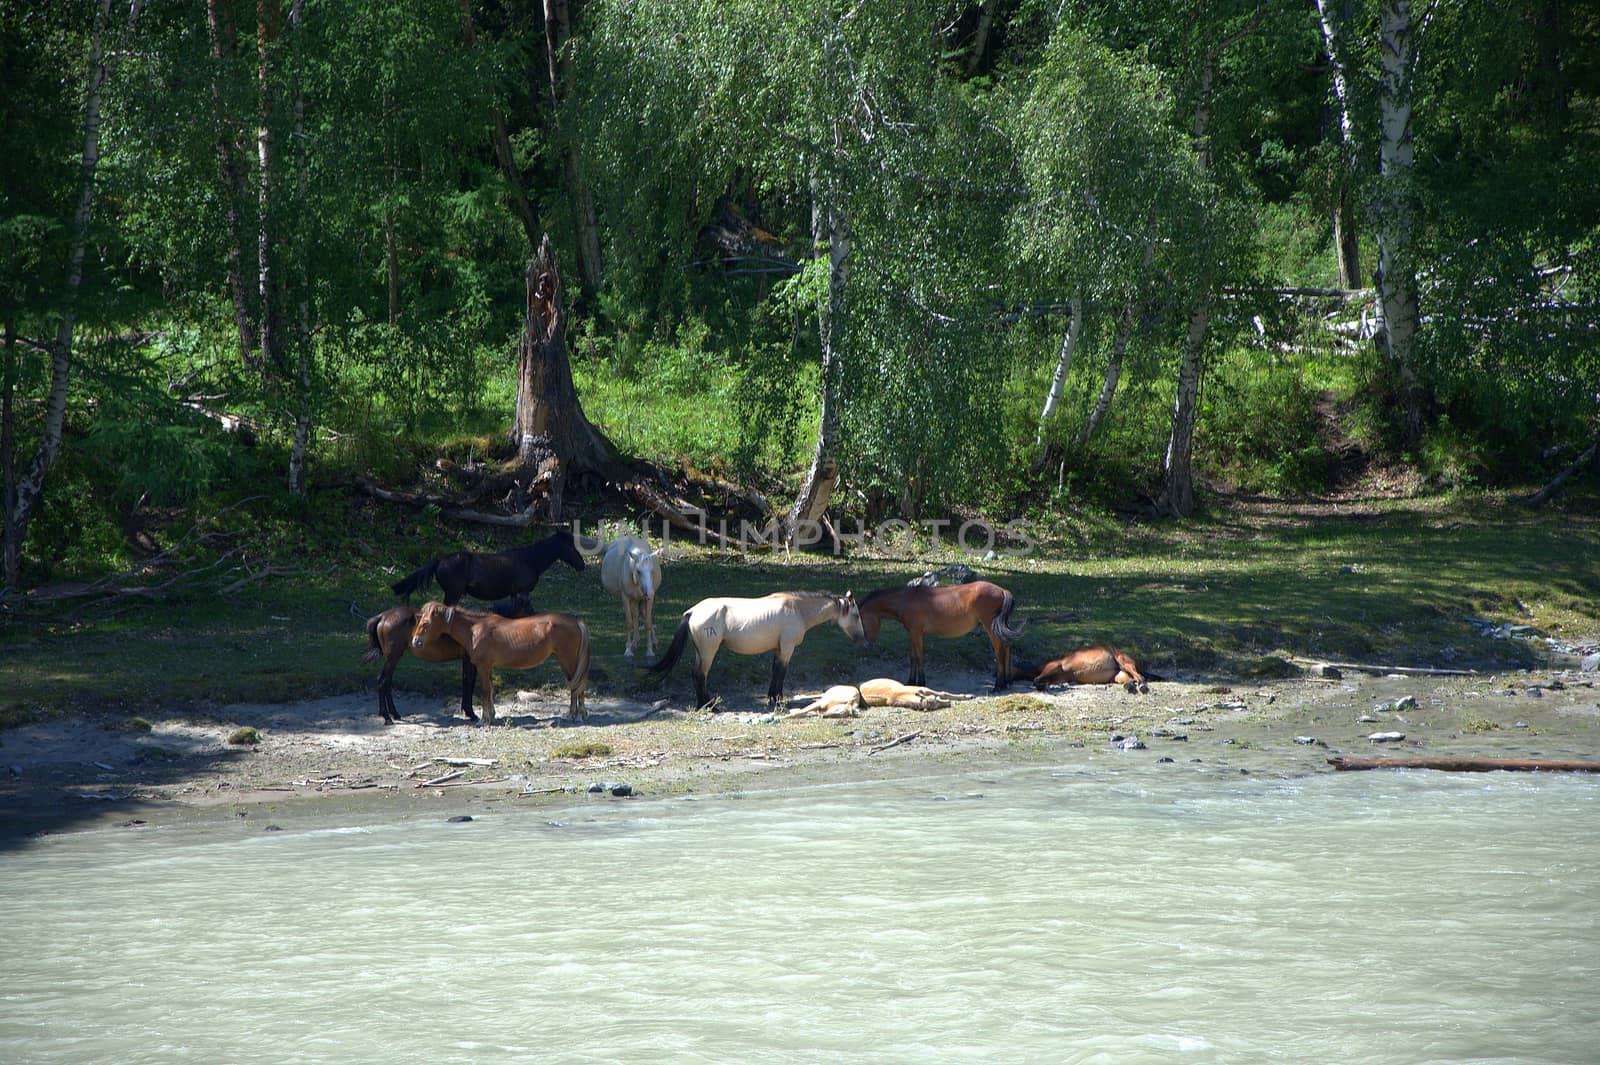 A small herd of horses resting in the shade of trees on the banks of a mountain river. Altai, Siberia, Russia.